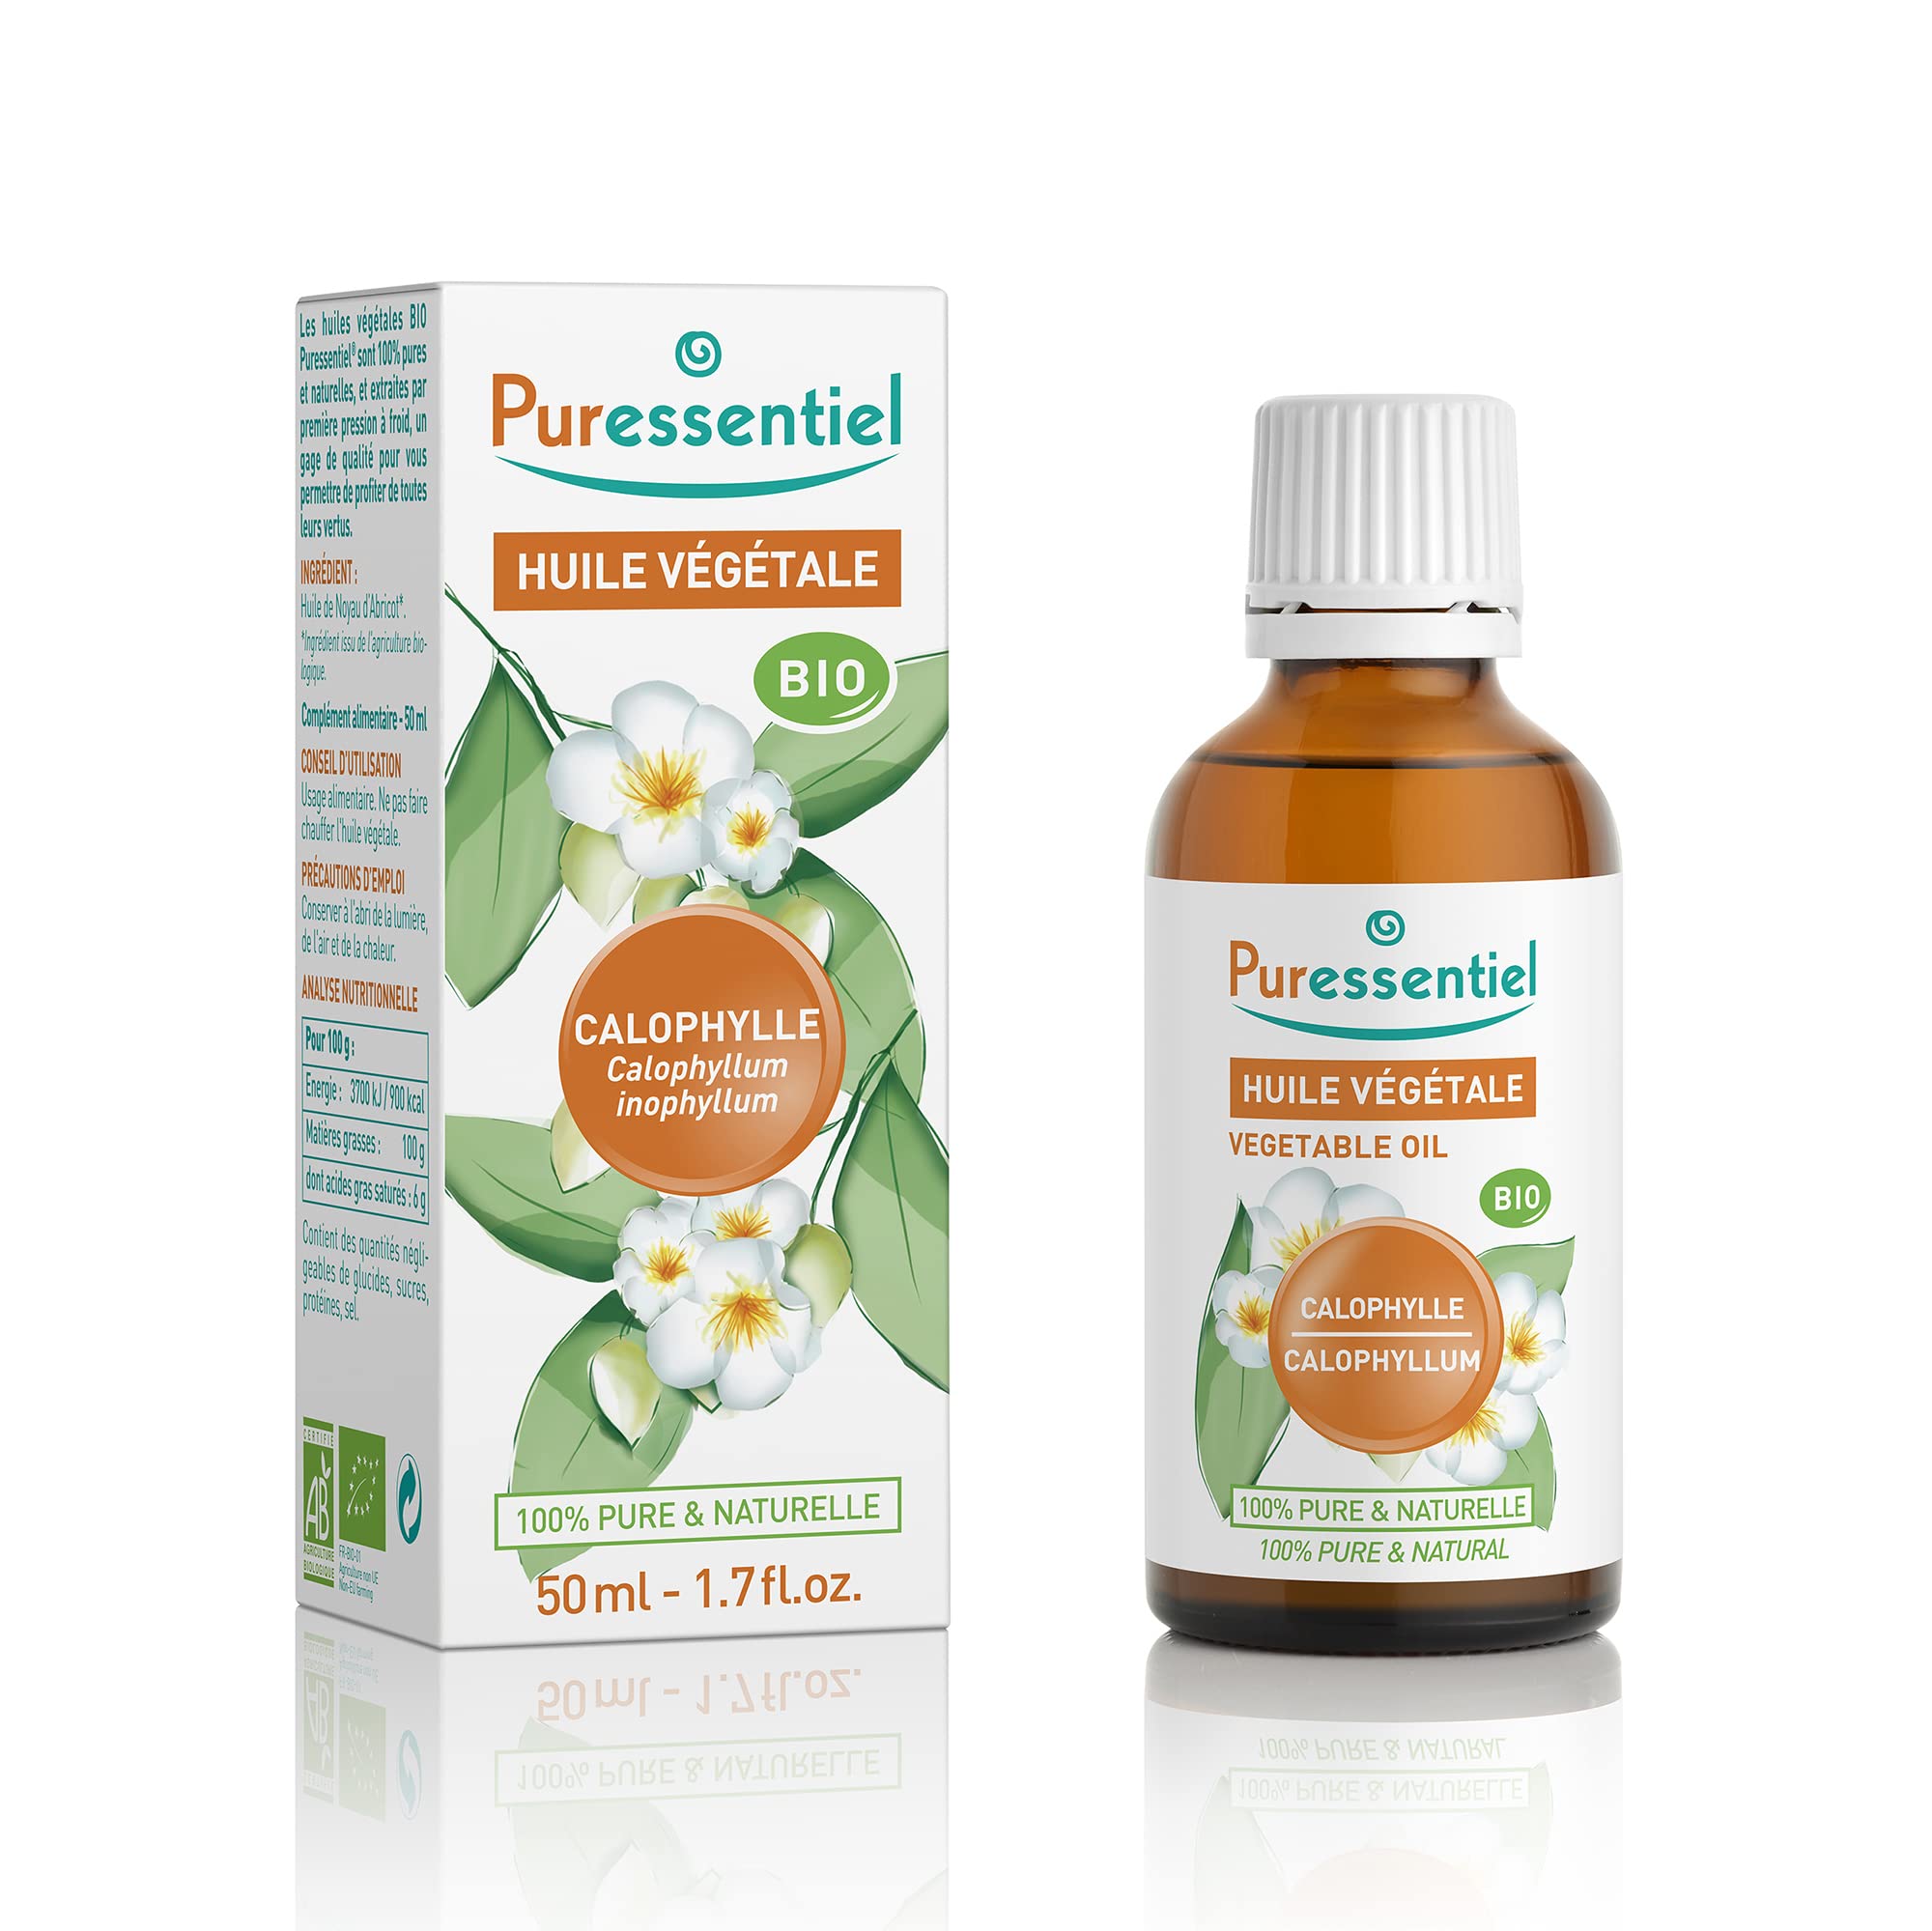 Puressentiel Organic Carrier Oil - Pure, Natural, and Organically Made - Beneficial Blend of Vegetable Oil and Essential Oils - Facilitates Healthy Absorption of Ingredients - Calophyllum - 1.7 oz